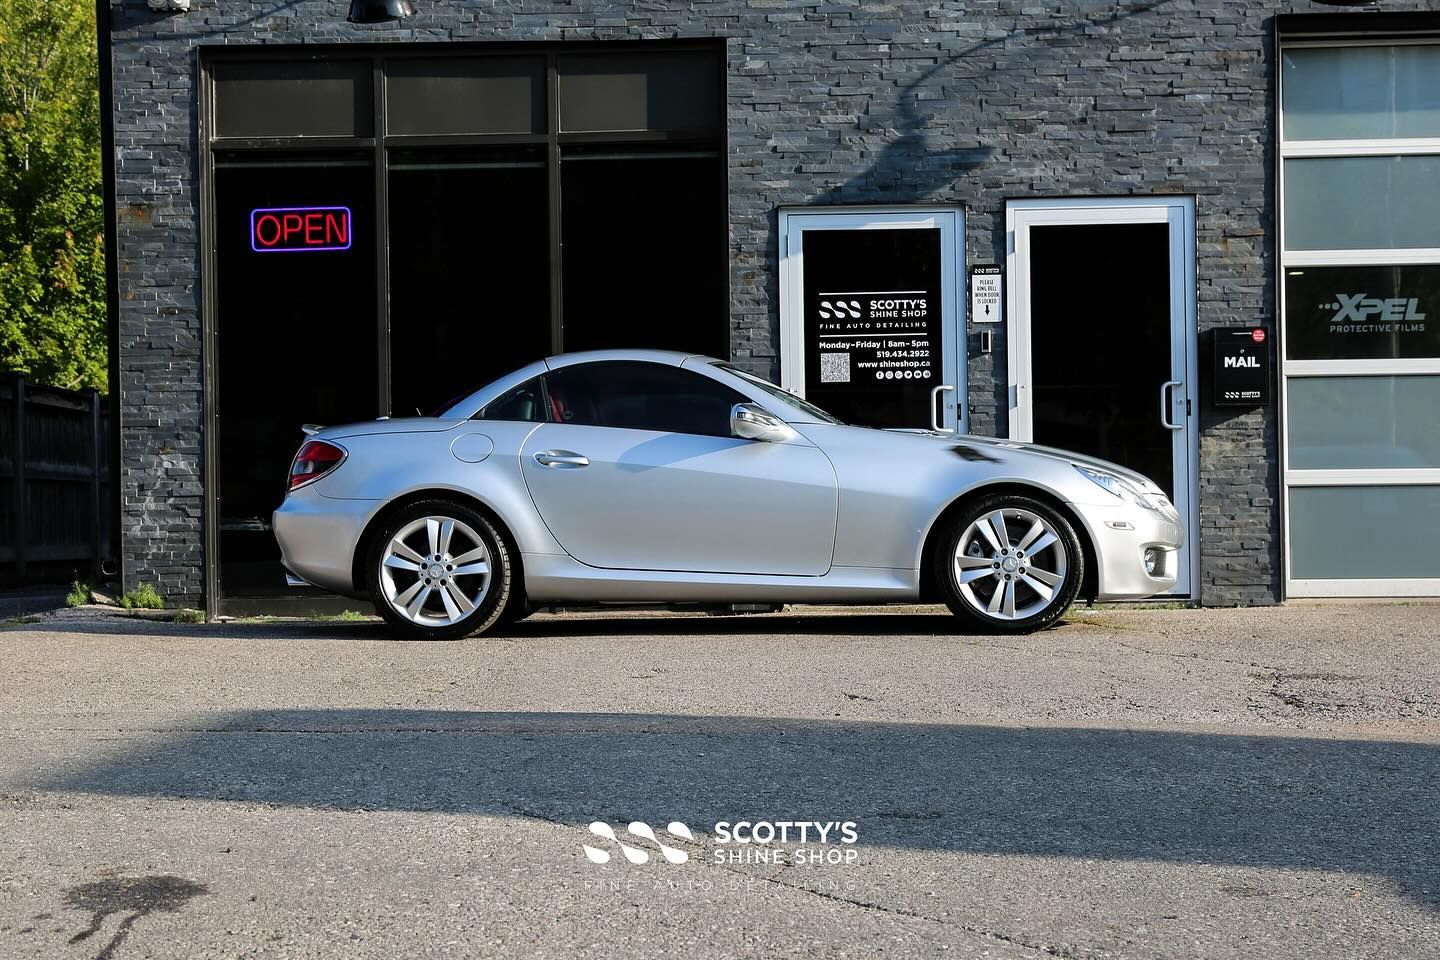 2009 Mercedes SLK350 Xpel Ultimate Plus and Xpel Fusion Ceramic Coating side view London, ON